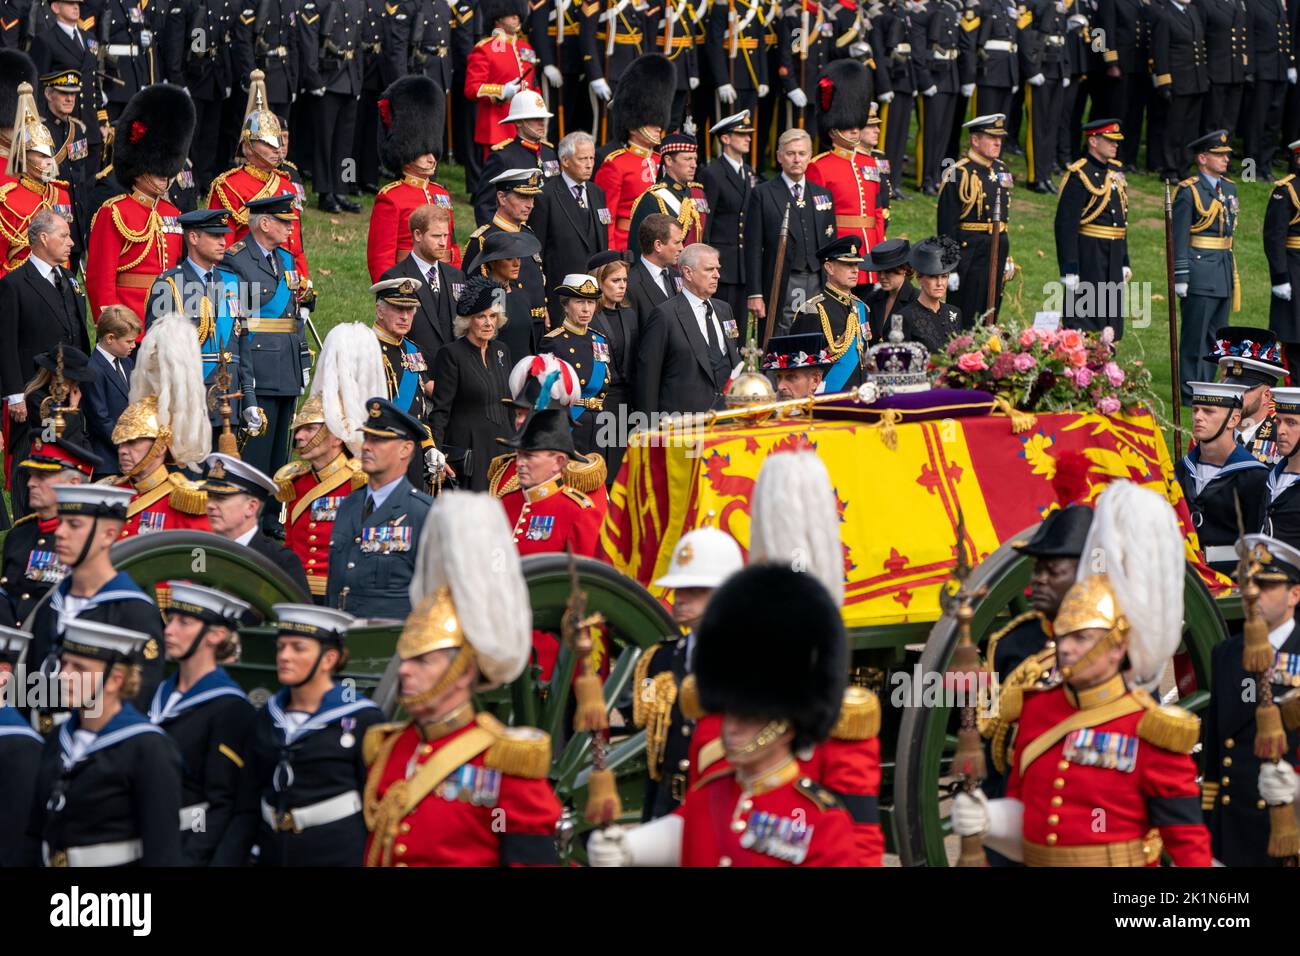 Prince George, the Prince of Wales, King Charles III, the Duke of Sussex, the Queen Consort, the Duchess of Sussex, the Princess Royal, Princess Beatrice, Peter Phillips, the Duke of York, the Earl of Wessex and the Countess of Wessex look on as the State Gun Carriage carrying the coffin of Queen Elizabeth II arrives at Wellington Arch during the Ceremonial Procession following her State Funeral at Westminster Abbey, London. Stock Photo